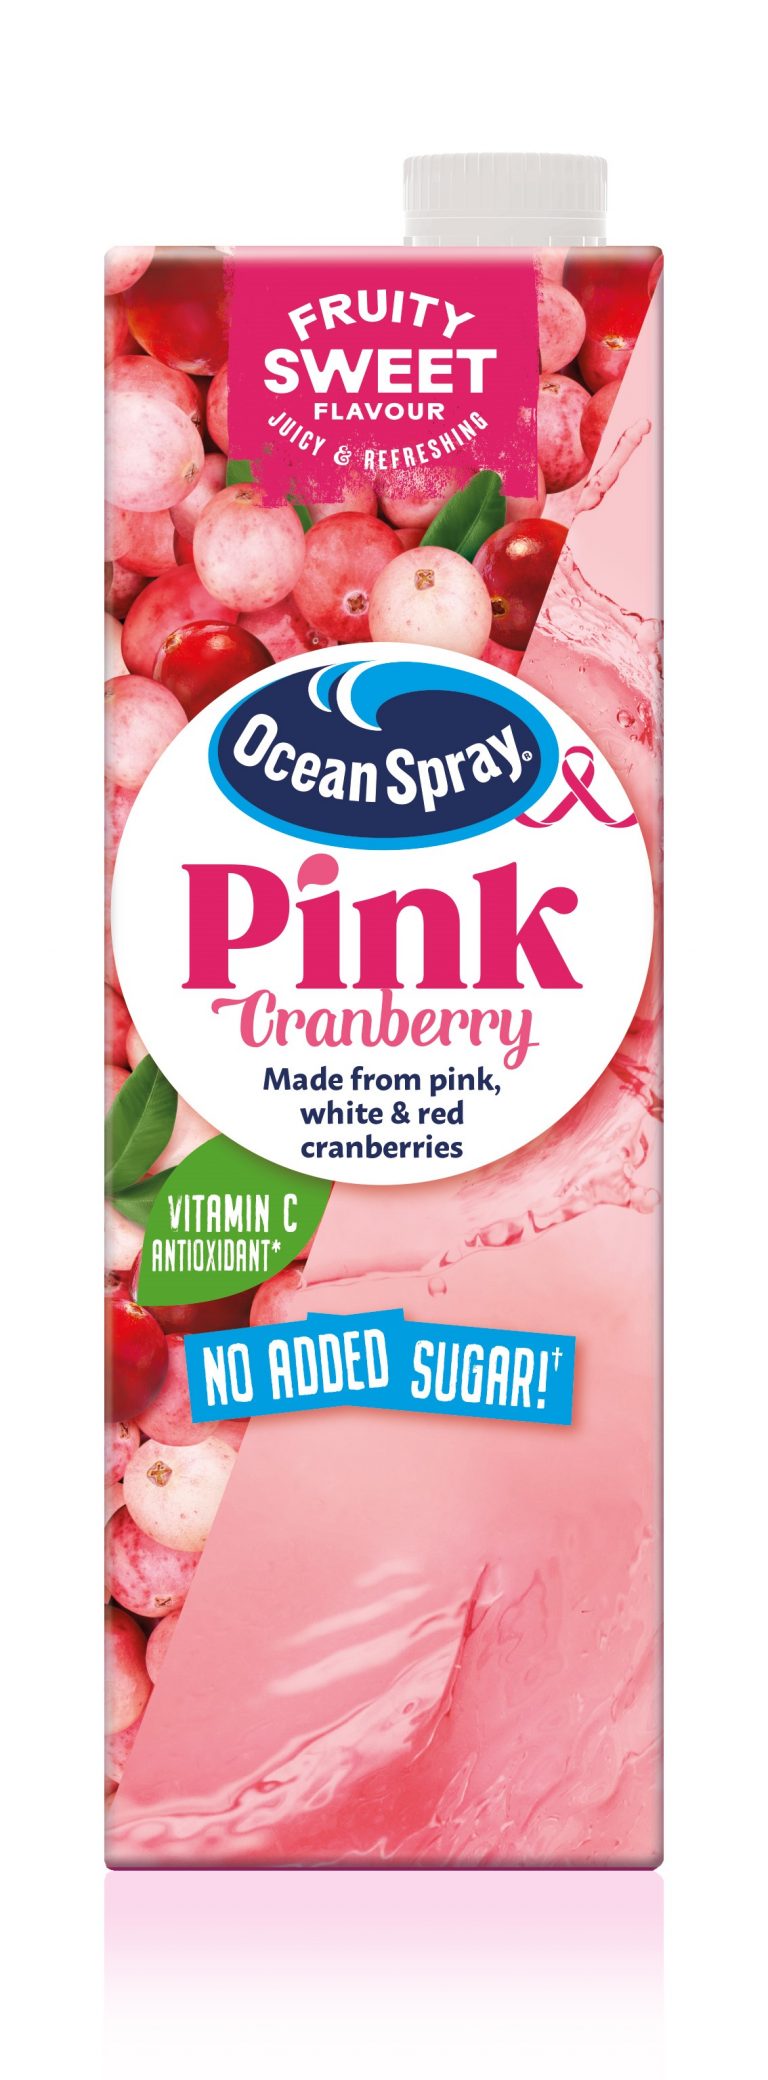 Ocean Spray launches new Pink Cranberry juice drink with a purpose